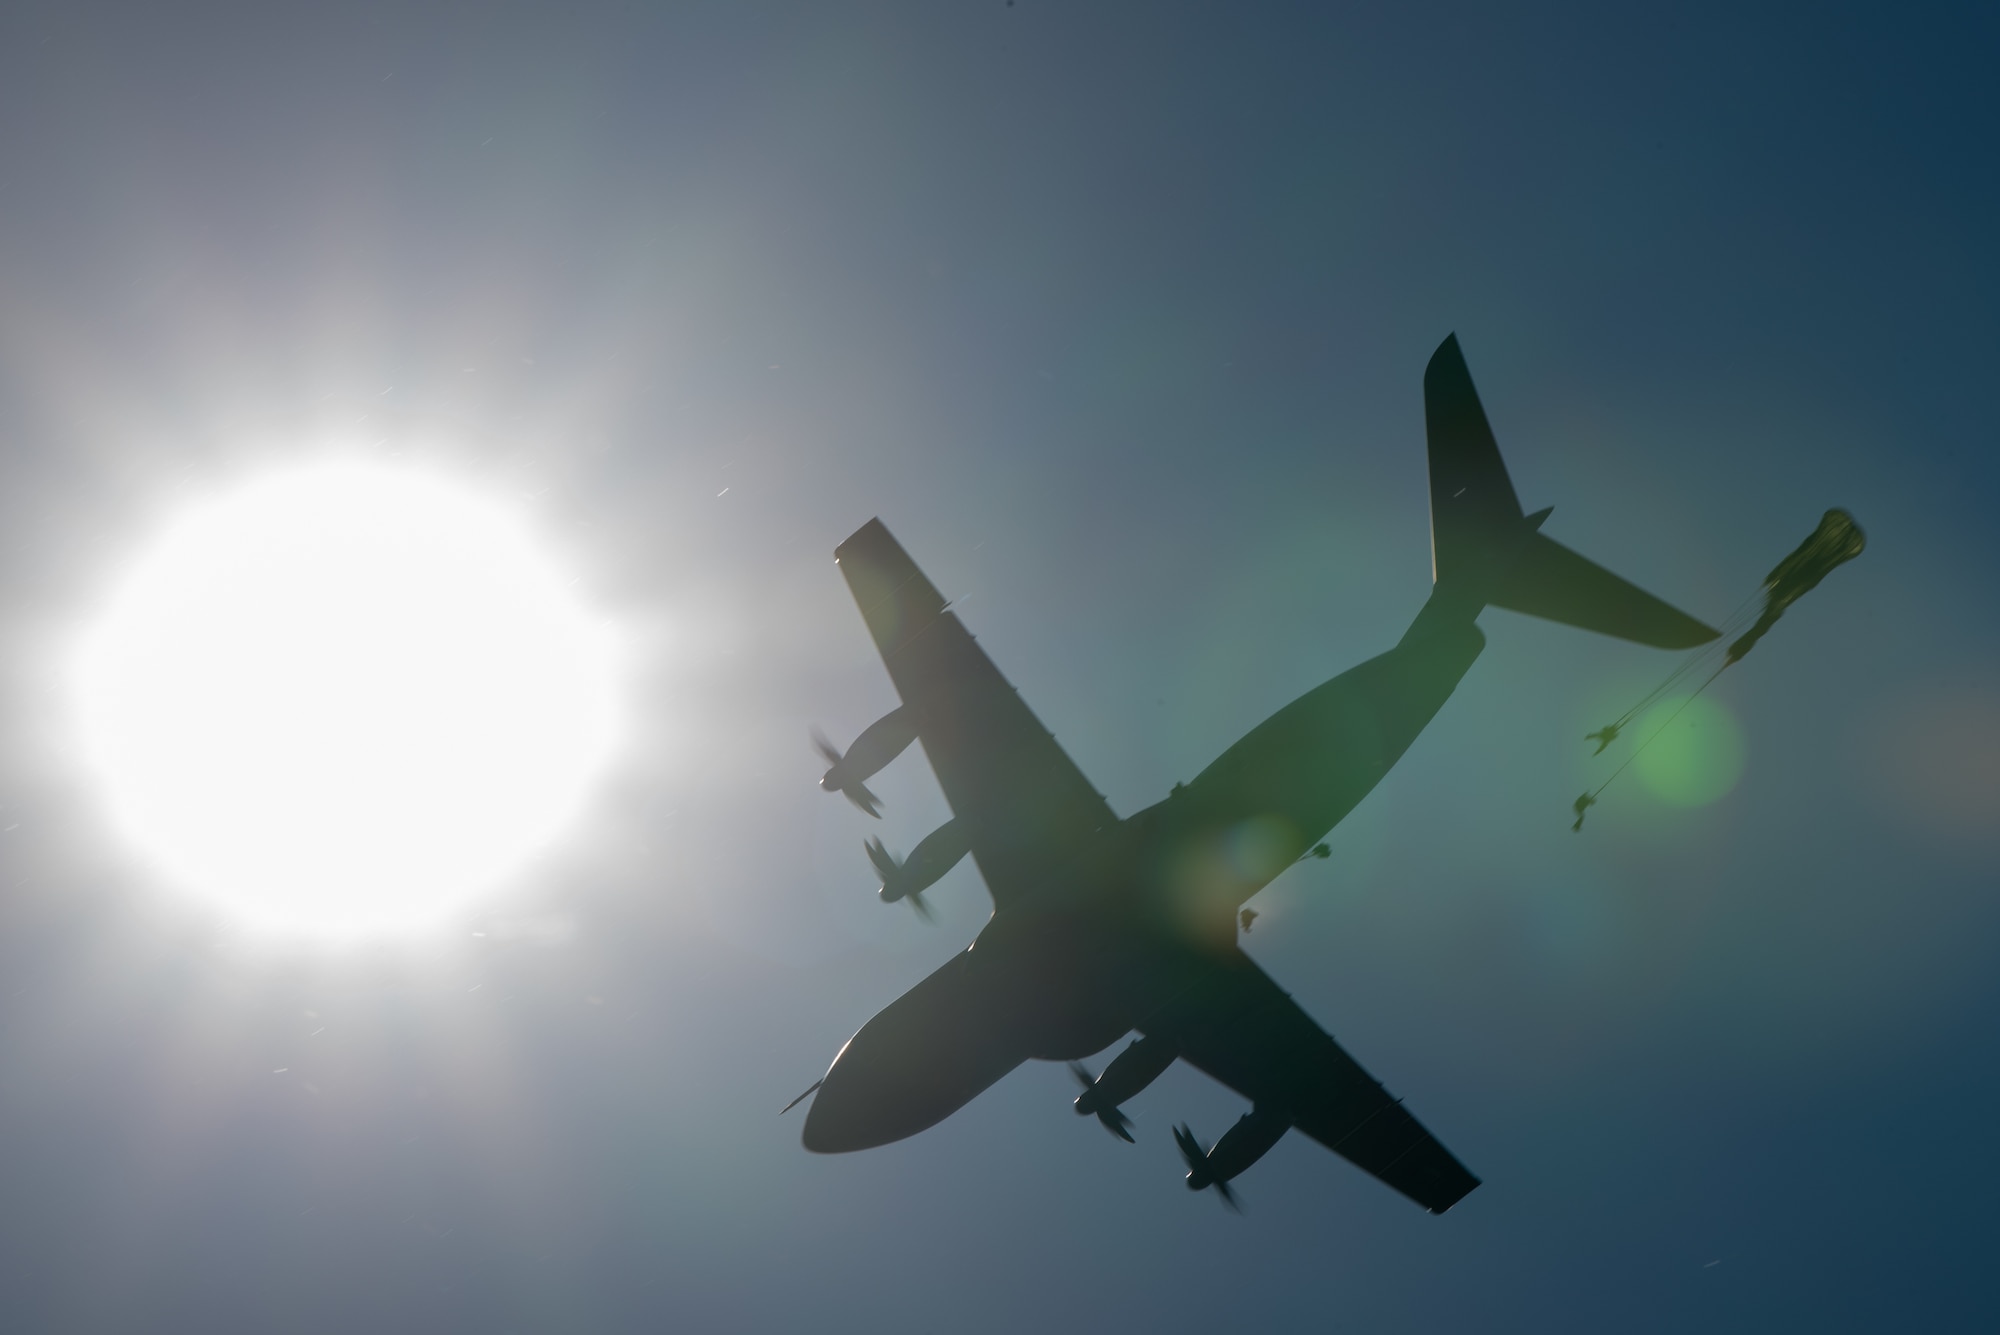 A German A400 Atlas drops paratroopers during exercise Air Defender 2023 (AD23) in Saarbrucken, Germany, June 14, 2023. Exercise AD23 integrates both U.S. and allied air-power to defend shared values, while leveraging and strengthening vital partnerships to deter aggression around the world. (U.S. Air National Guard photo by Master Sgt. Phil Speck)